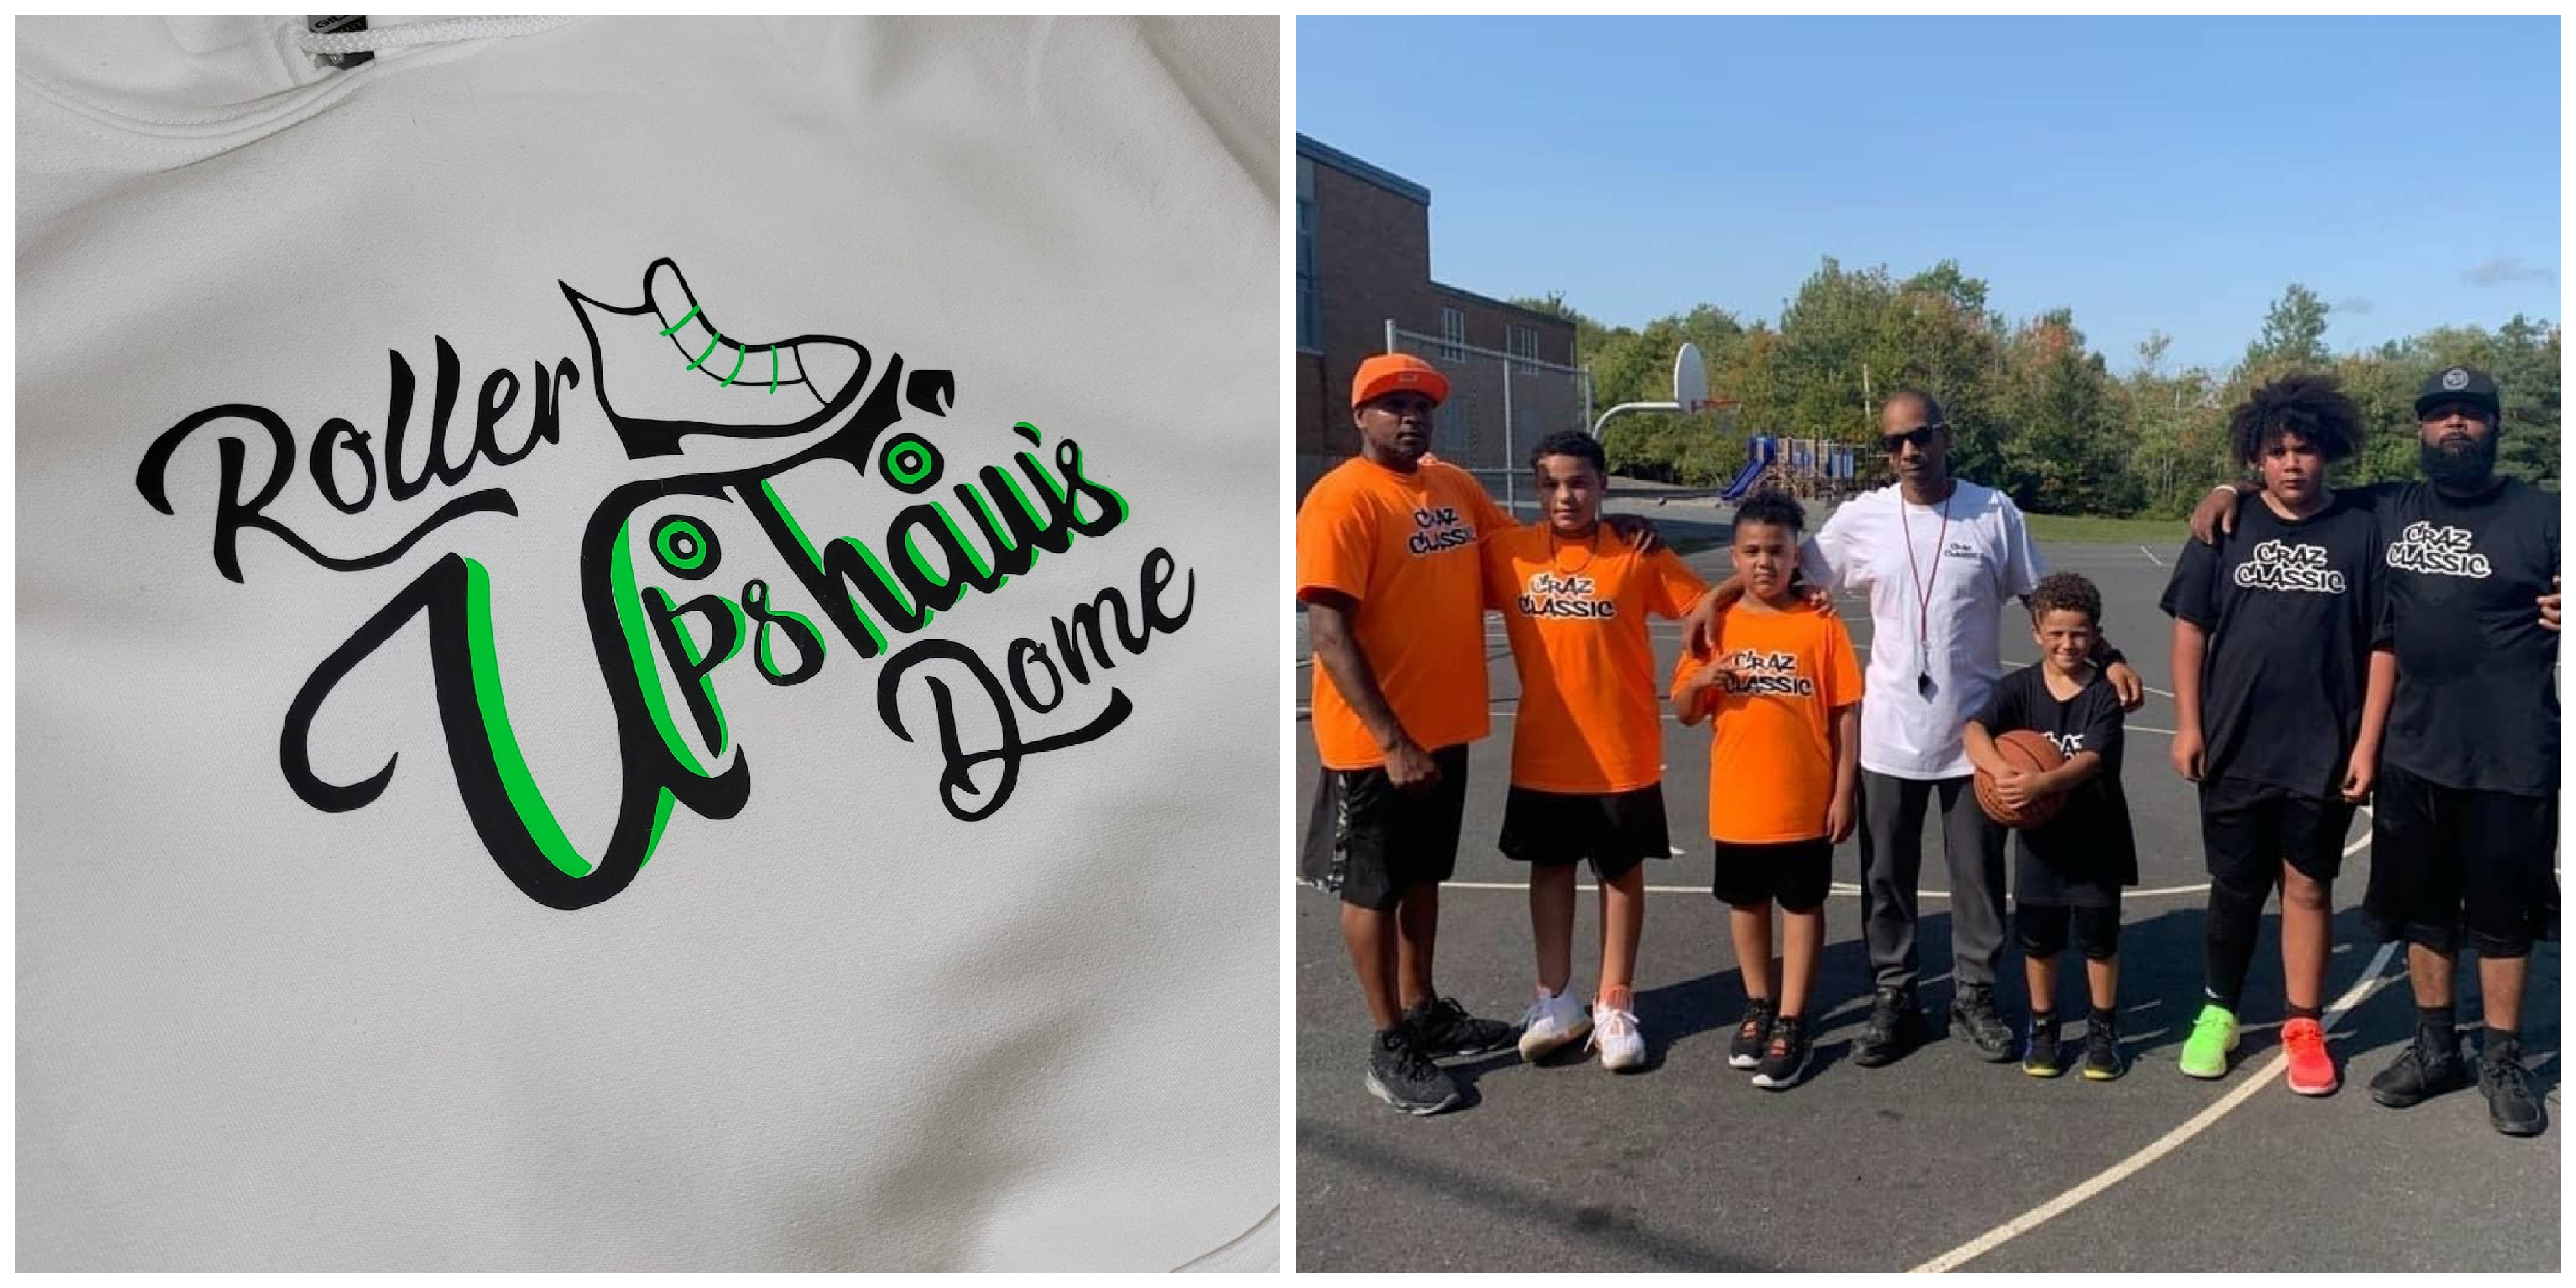 Left: Upshaw's Roller Dome hoodies.  Right: Participants of the 'Craz Classic' basketball tournament wearing orange and black t-shirts, respectively, for the tournament.  Clothing in both photos created by High Powered Customs 